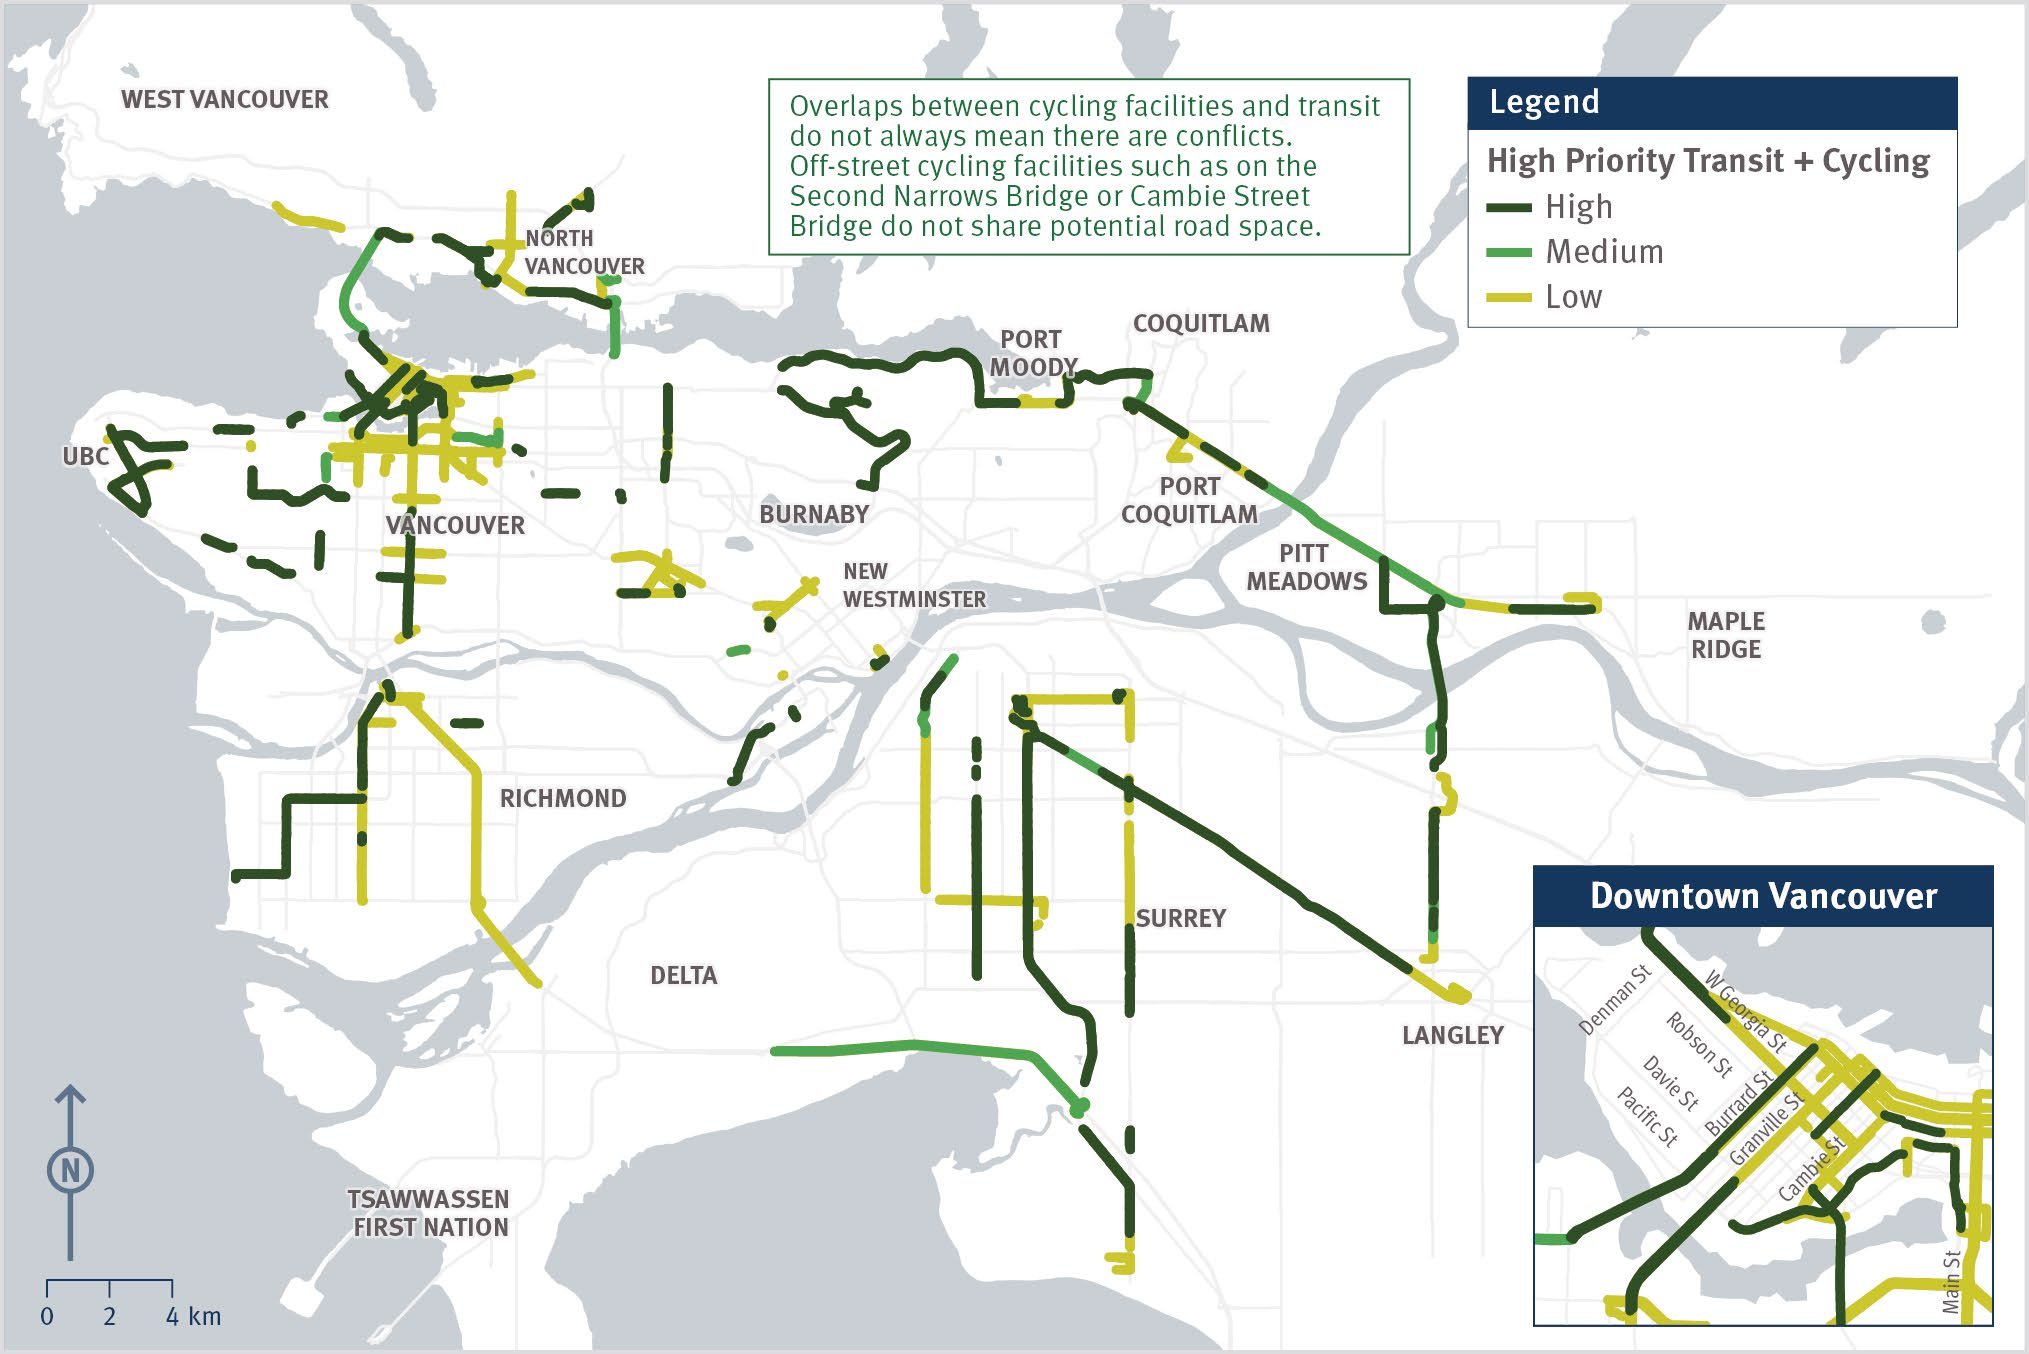 A map showing corridors of high priority transit and cycling